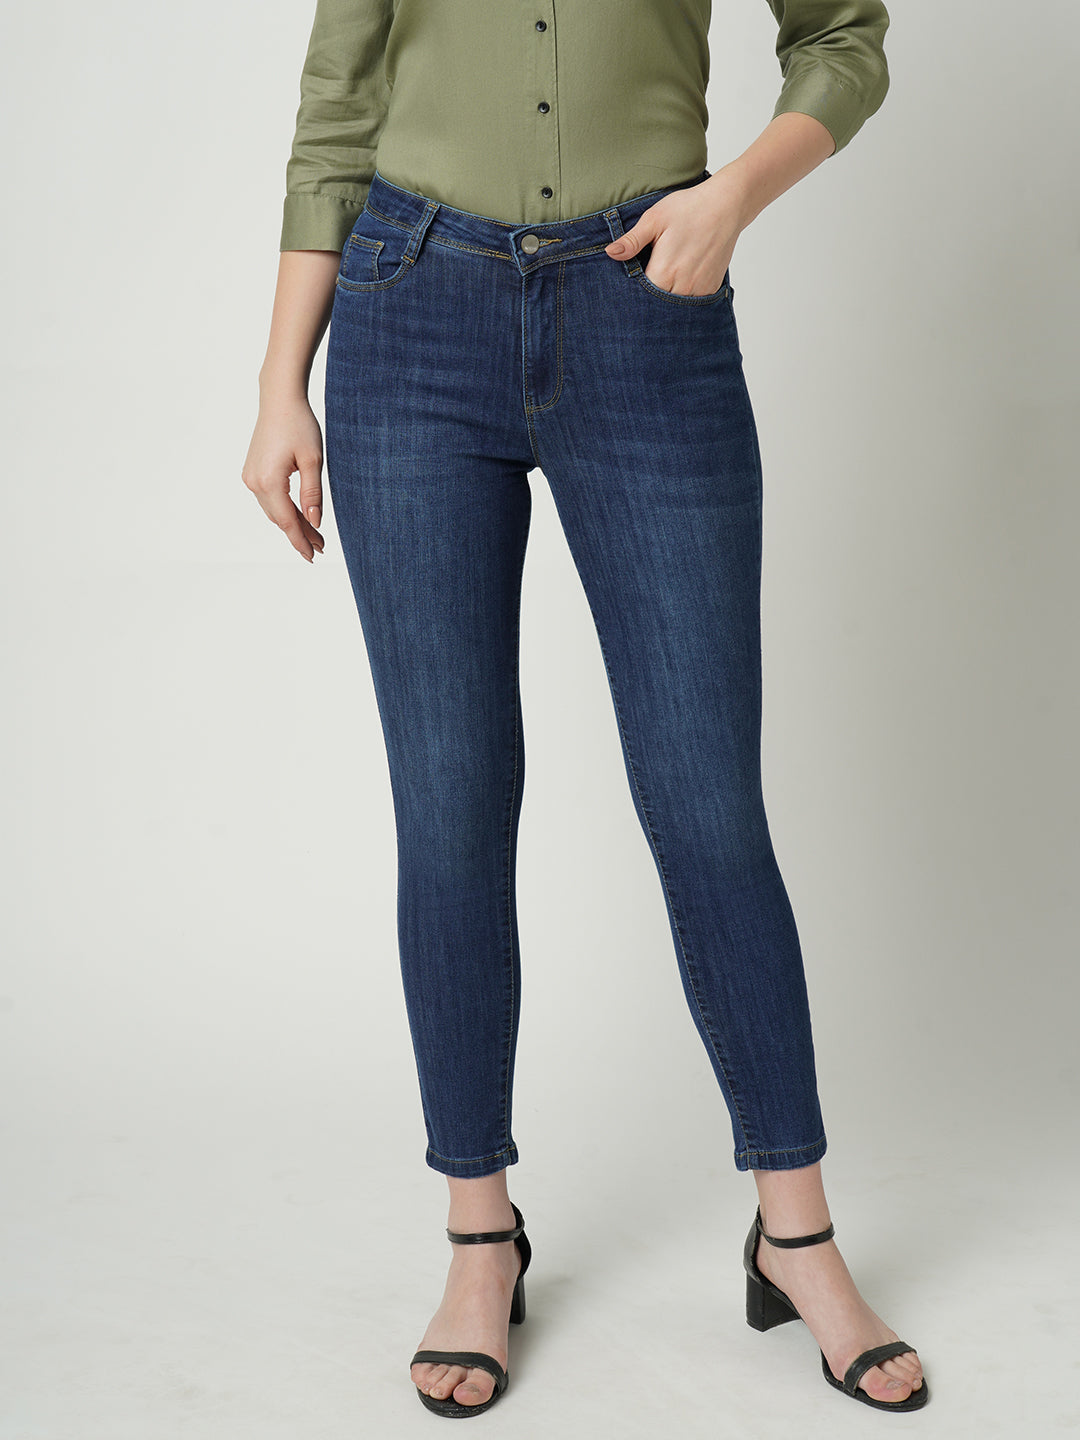 MW Tall Curvy High-rise Skinny Jeans In Moreaux Wash in Blue